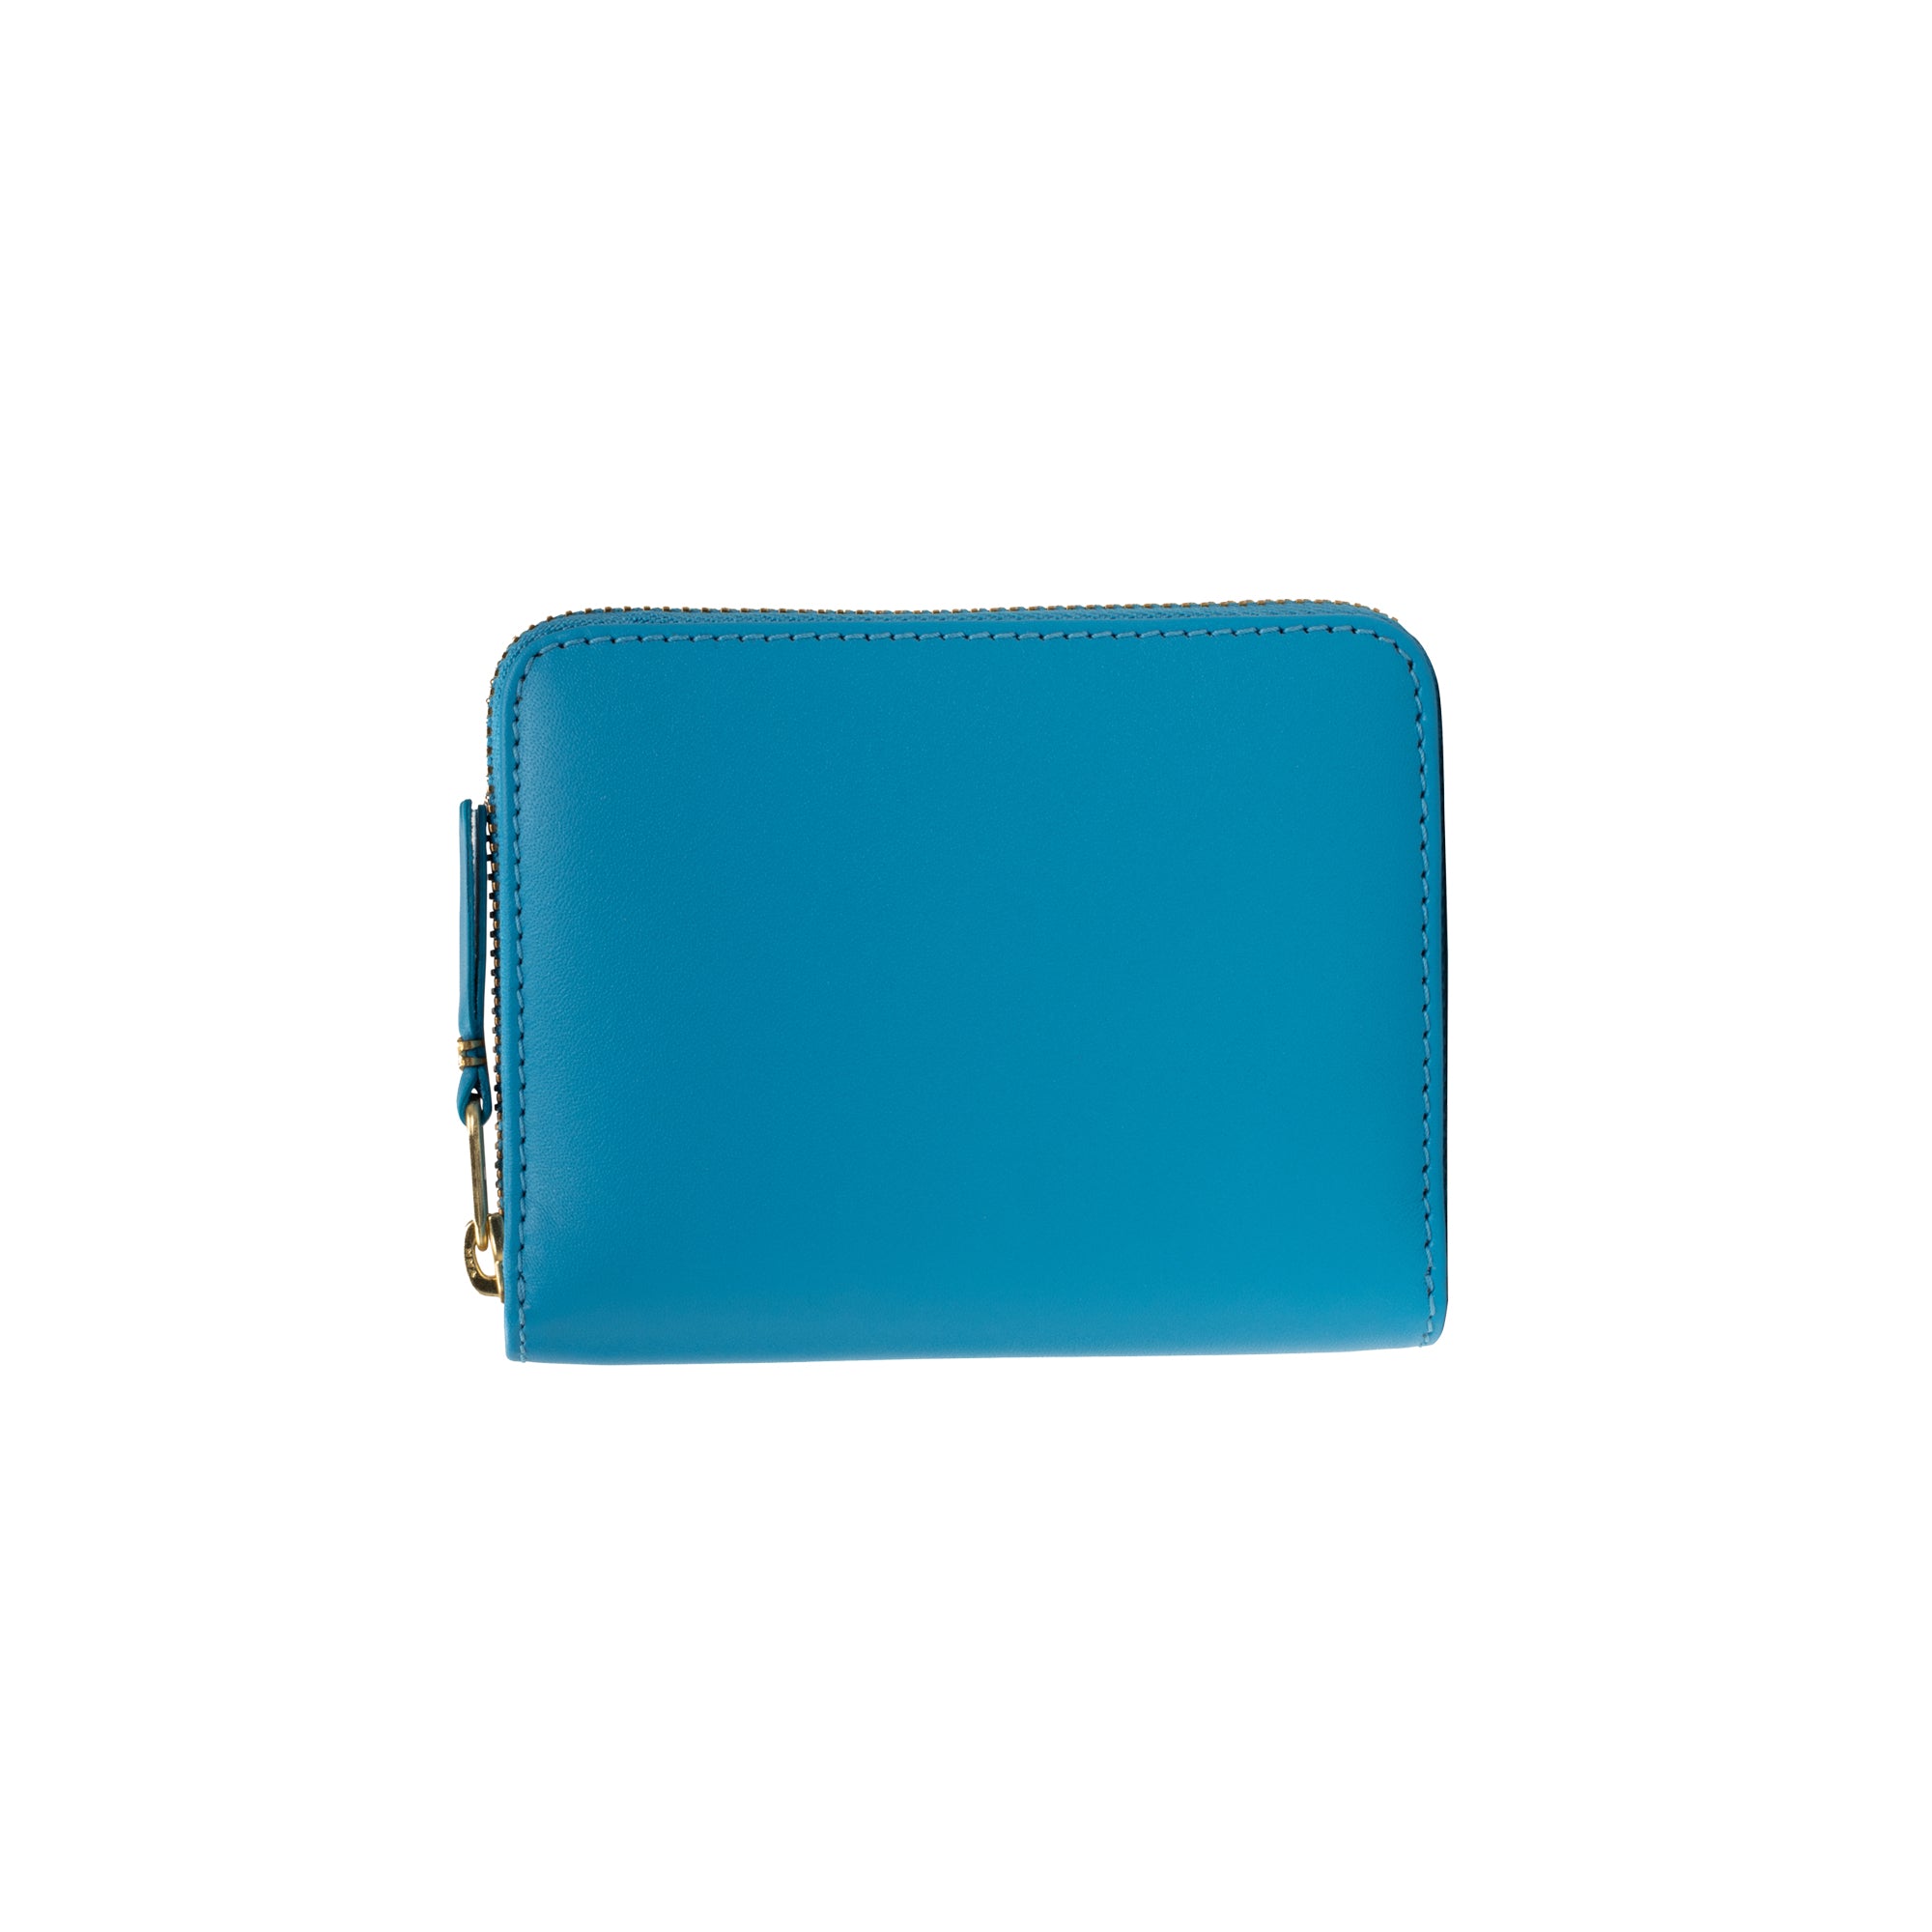 CDG WALLET - Colored Leather Wallet - (SA2110 Blue) view 1